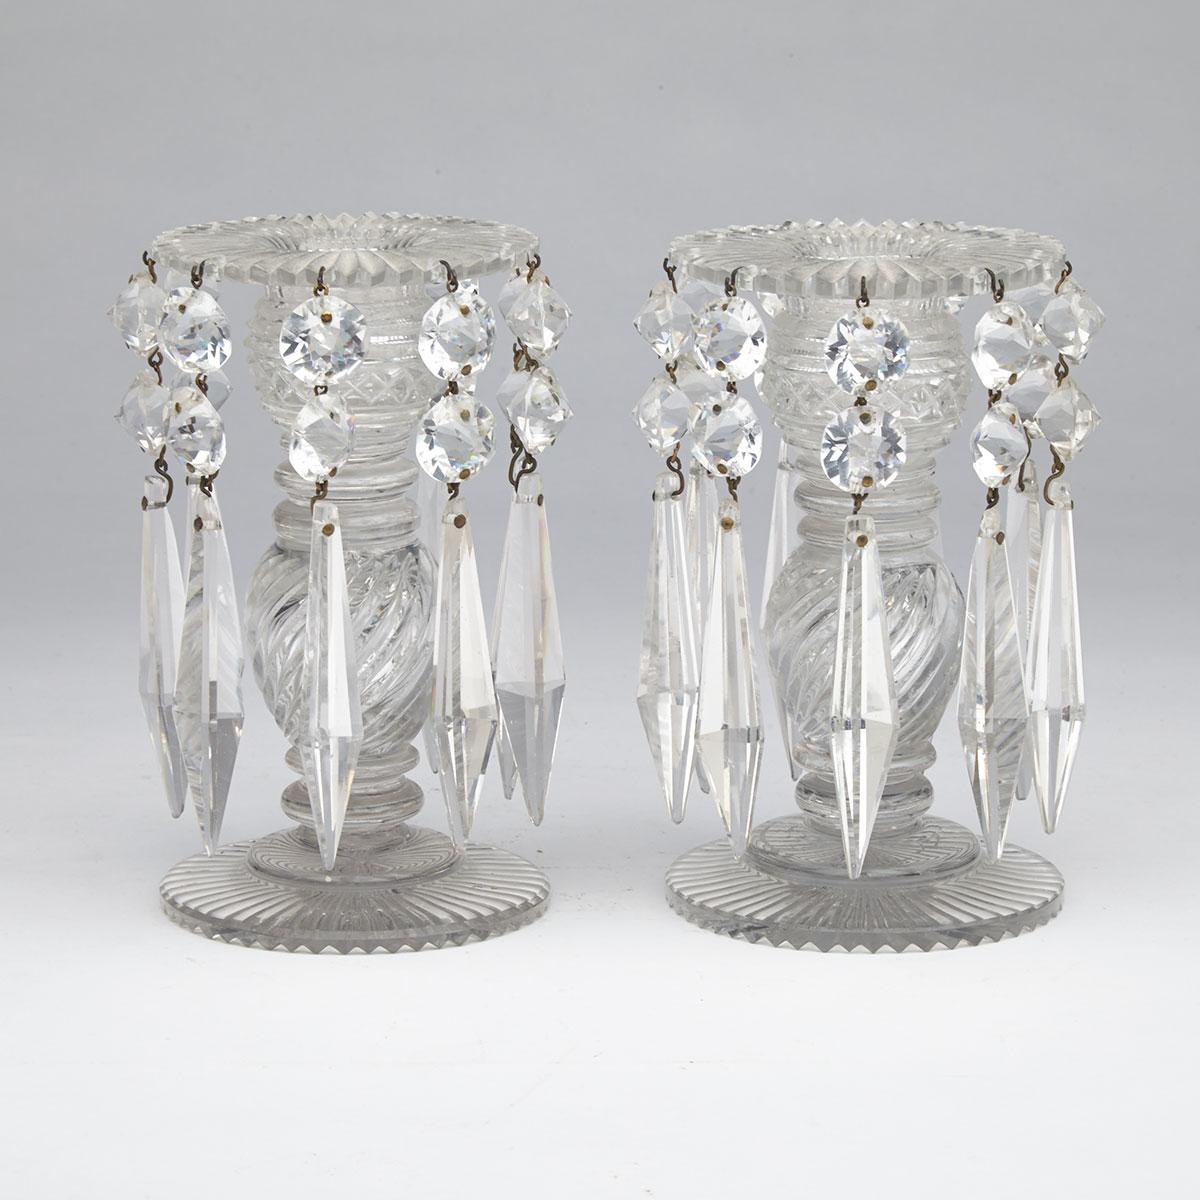 Pair of Anglo-Irish Cut Glass Candlestick Lustres, 19th century